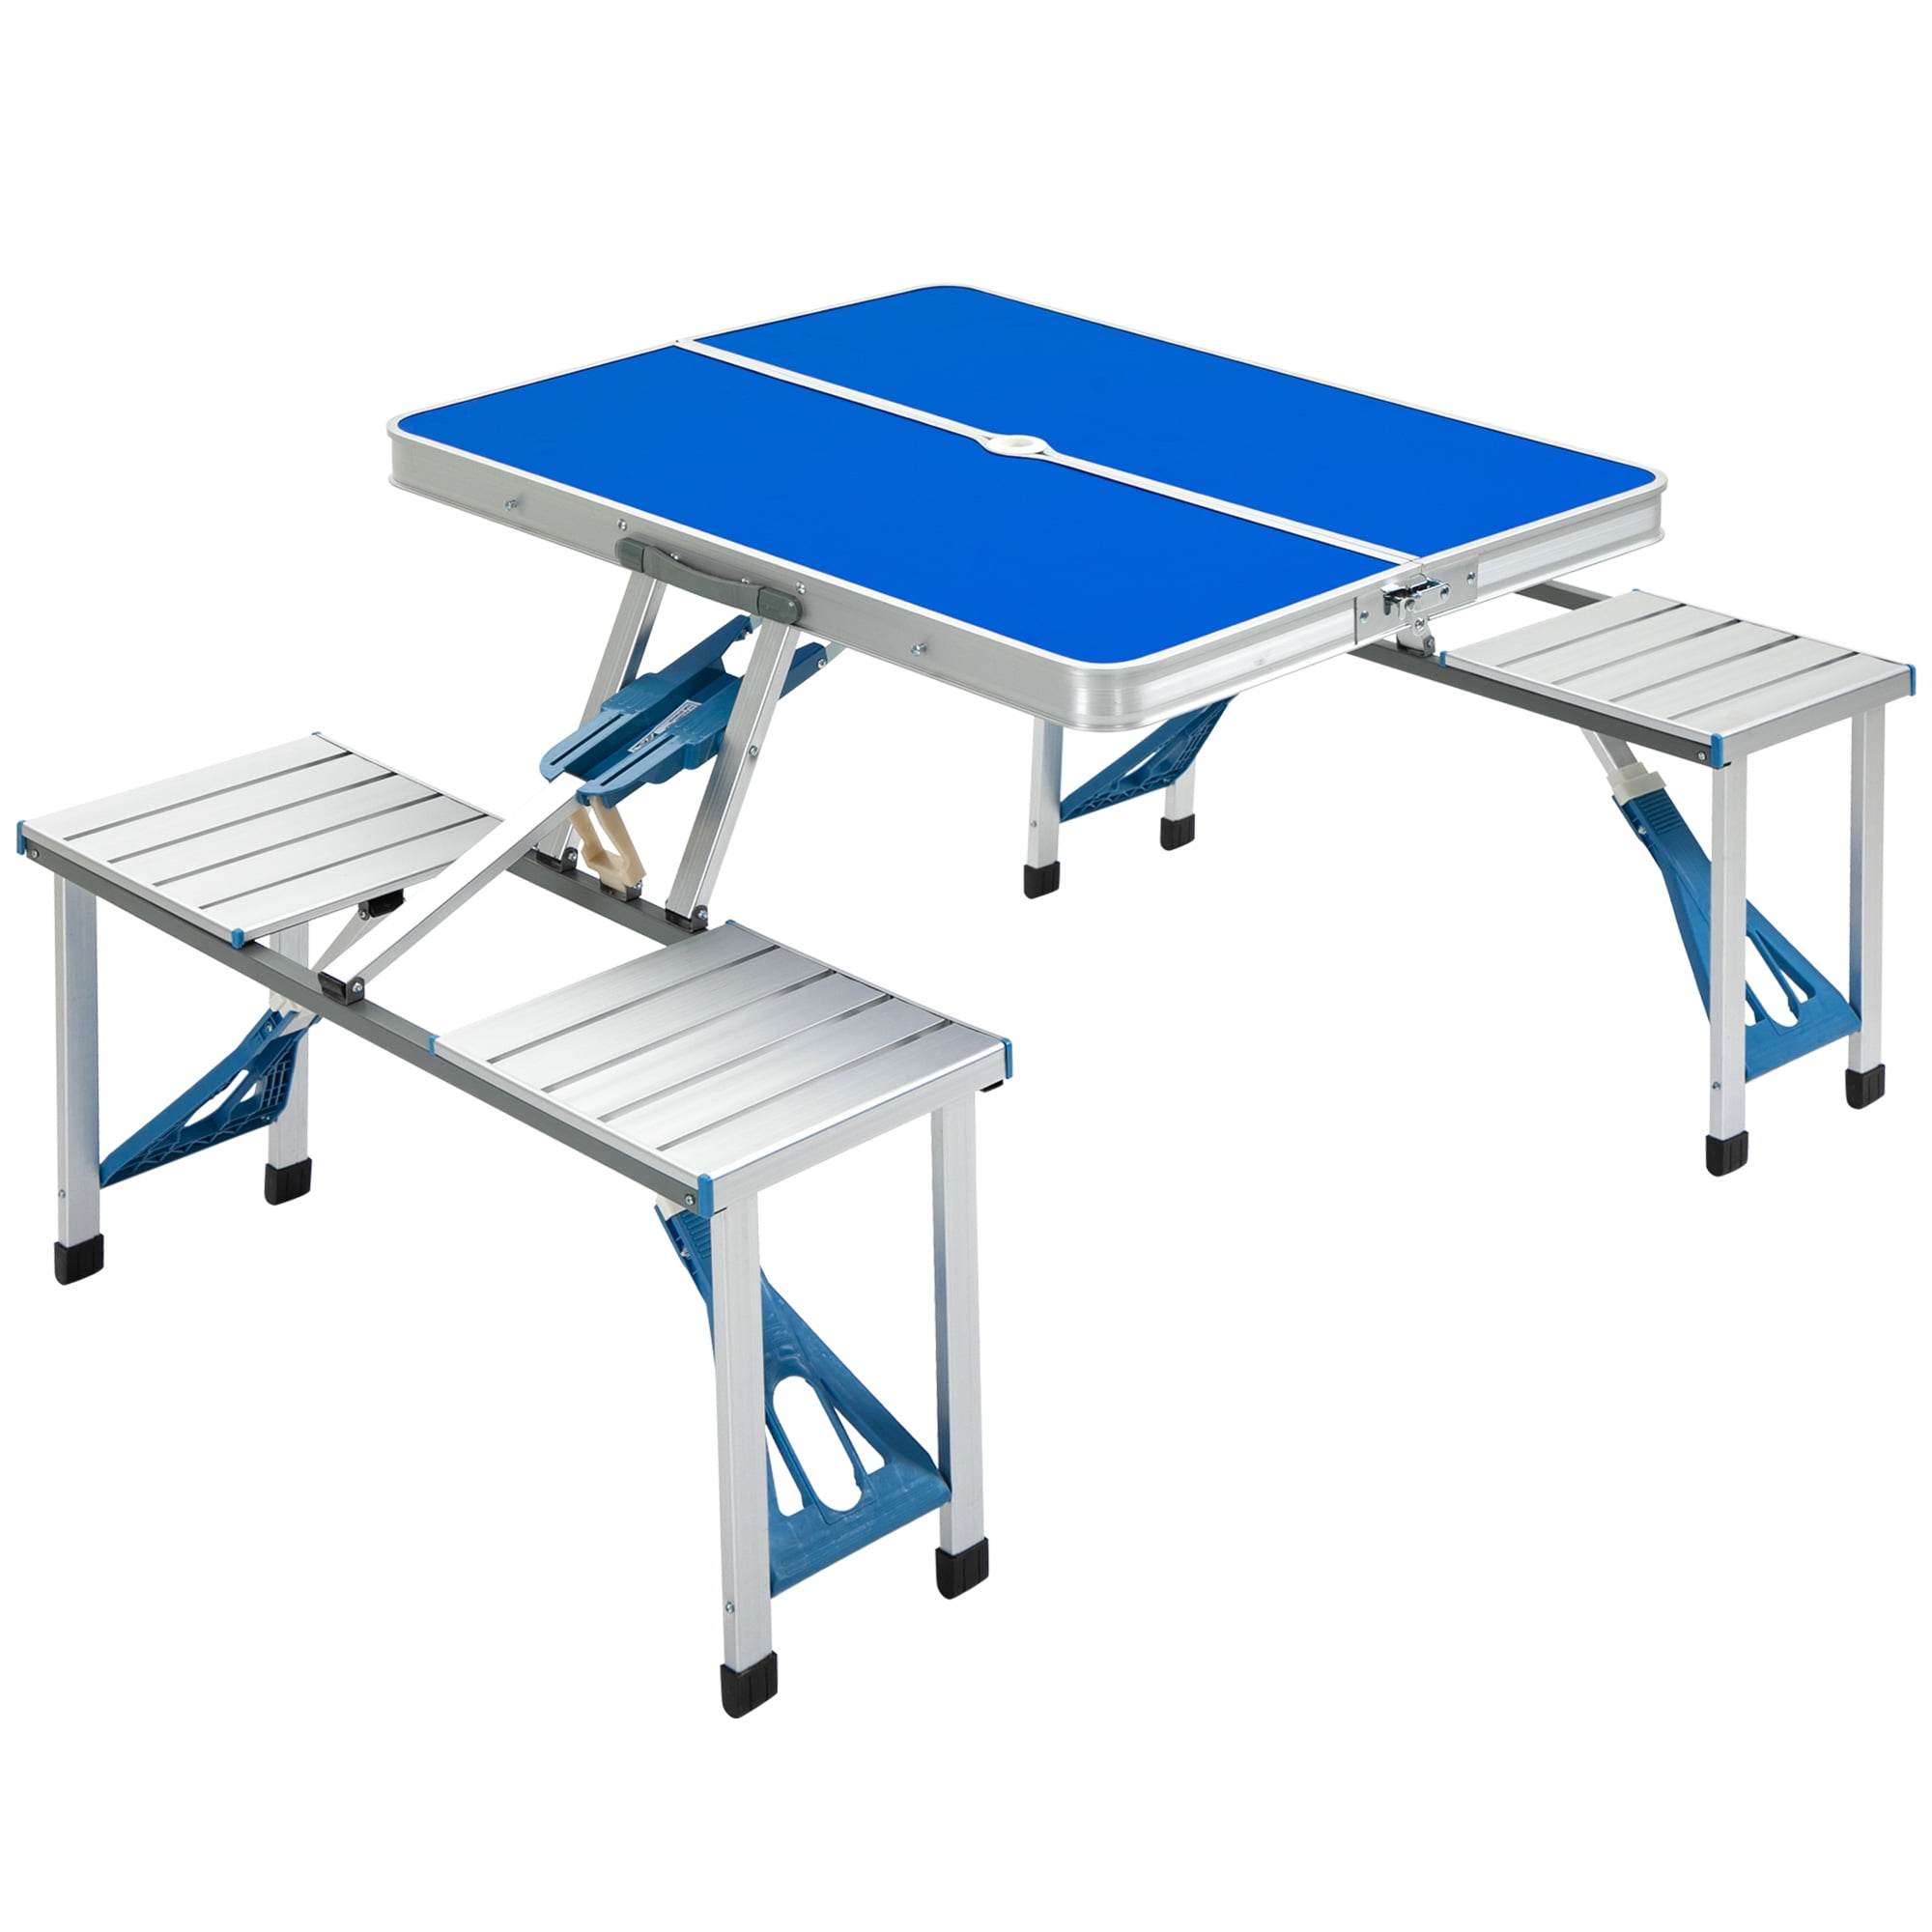 3 Foot Aluminum Folding Ping Pong Table Indoor Outdoor Camping Picnic Beer Table 